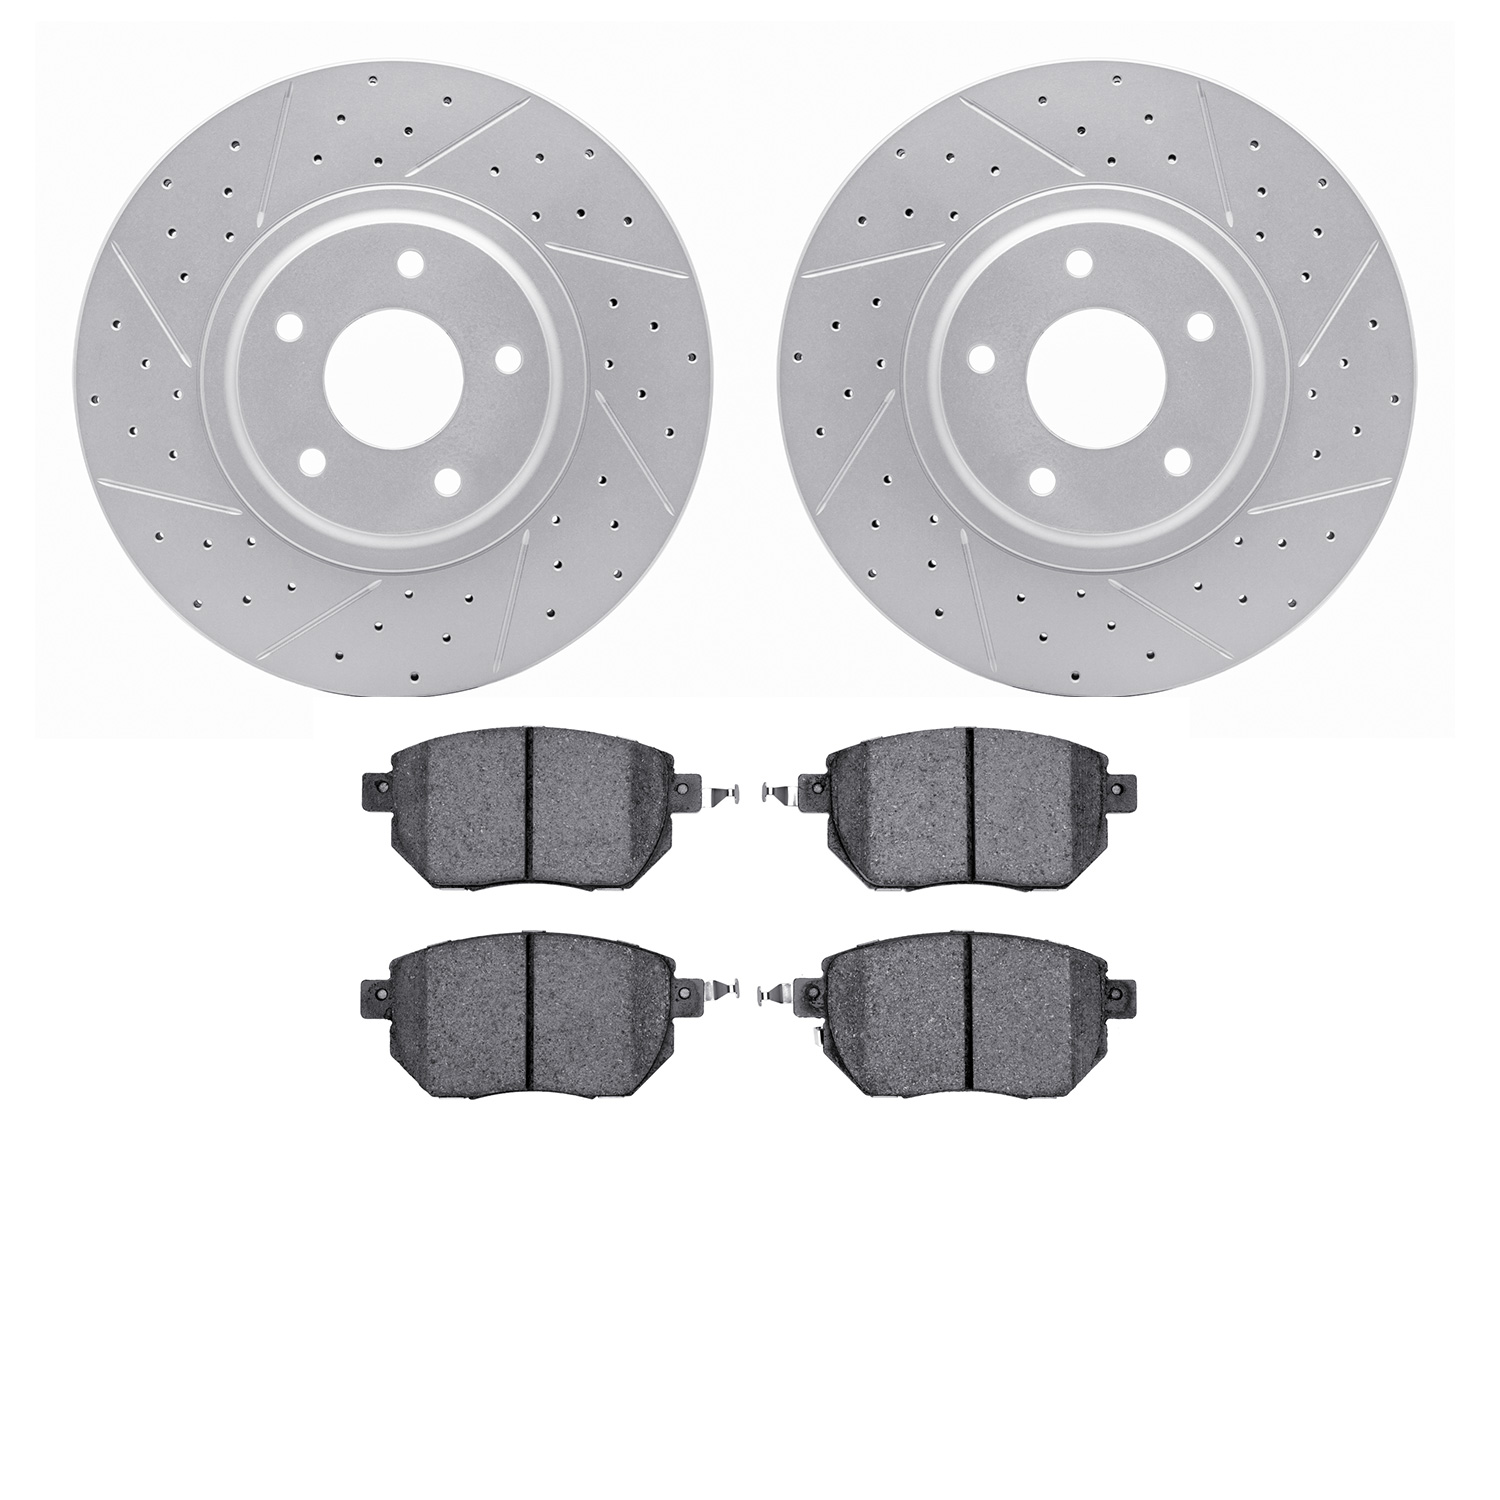 2502-67104 Geoperformance Drilled/Slotted Rotors w/5000 Advanced Brake Pads Kit, 2003-2005 Infiniti/Nissan, Position: Front